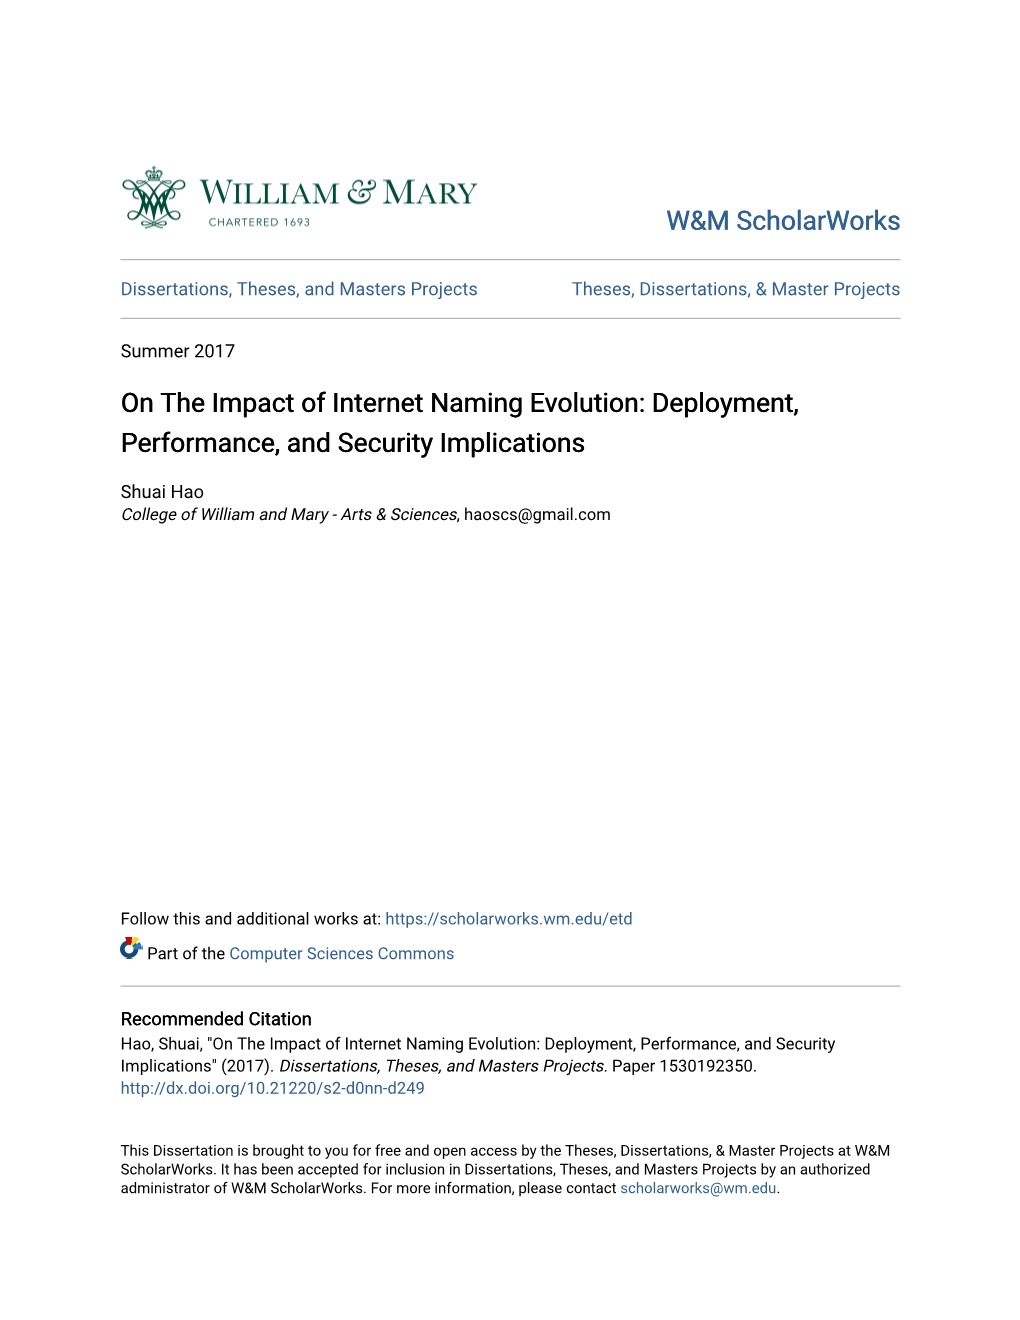 On the Impact of Internet Naming Evolution: Deployment, Performance, and Security Implications